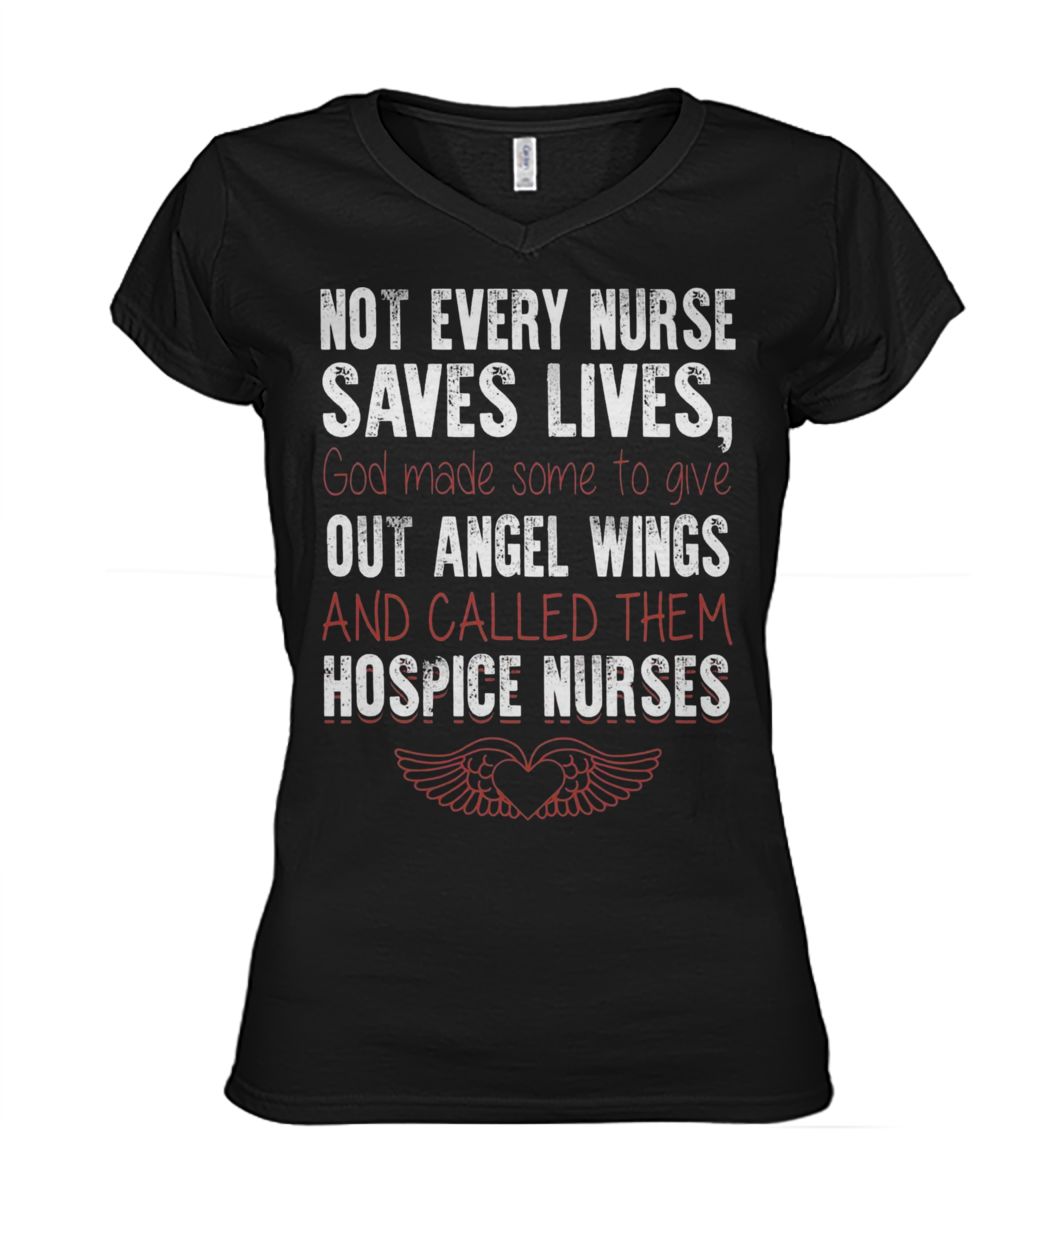 Not every nurse saves lives god made some to give out angel wings women's v-neck